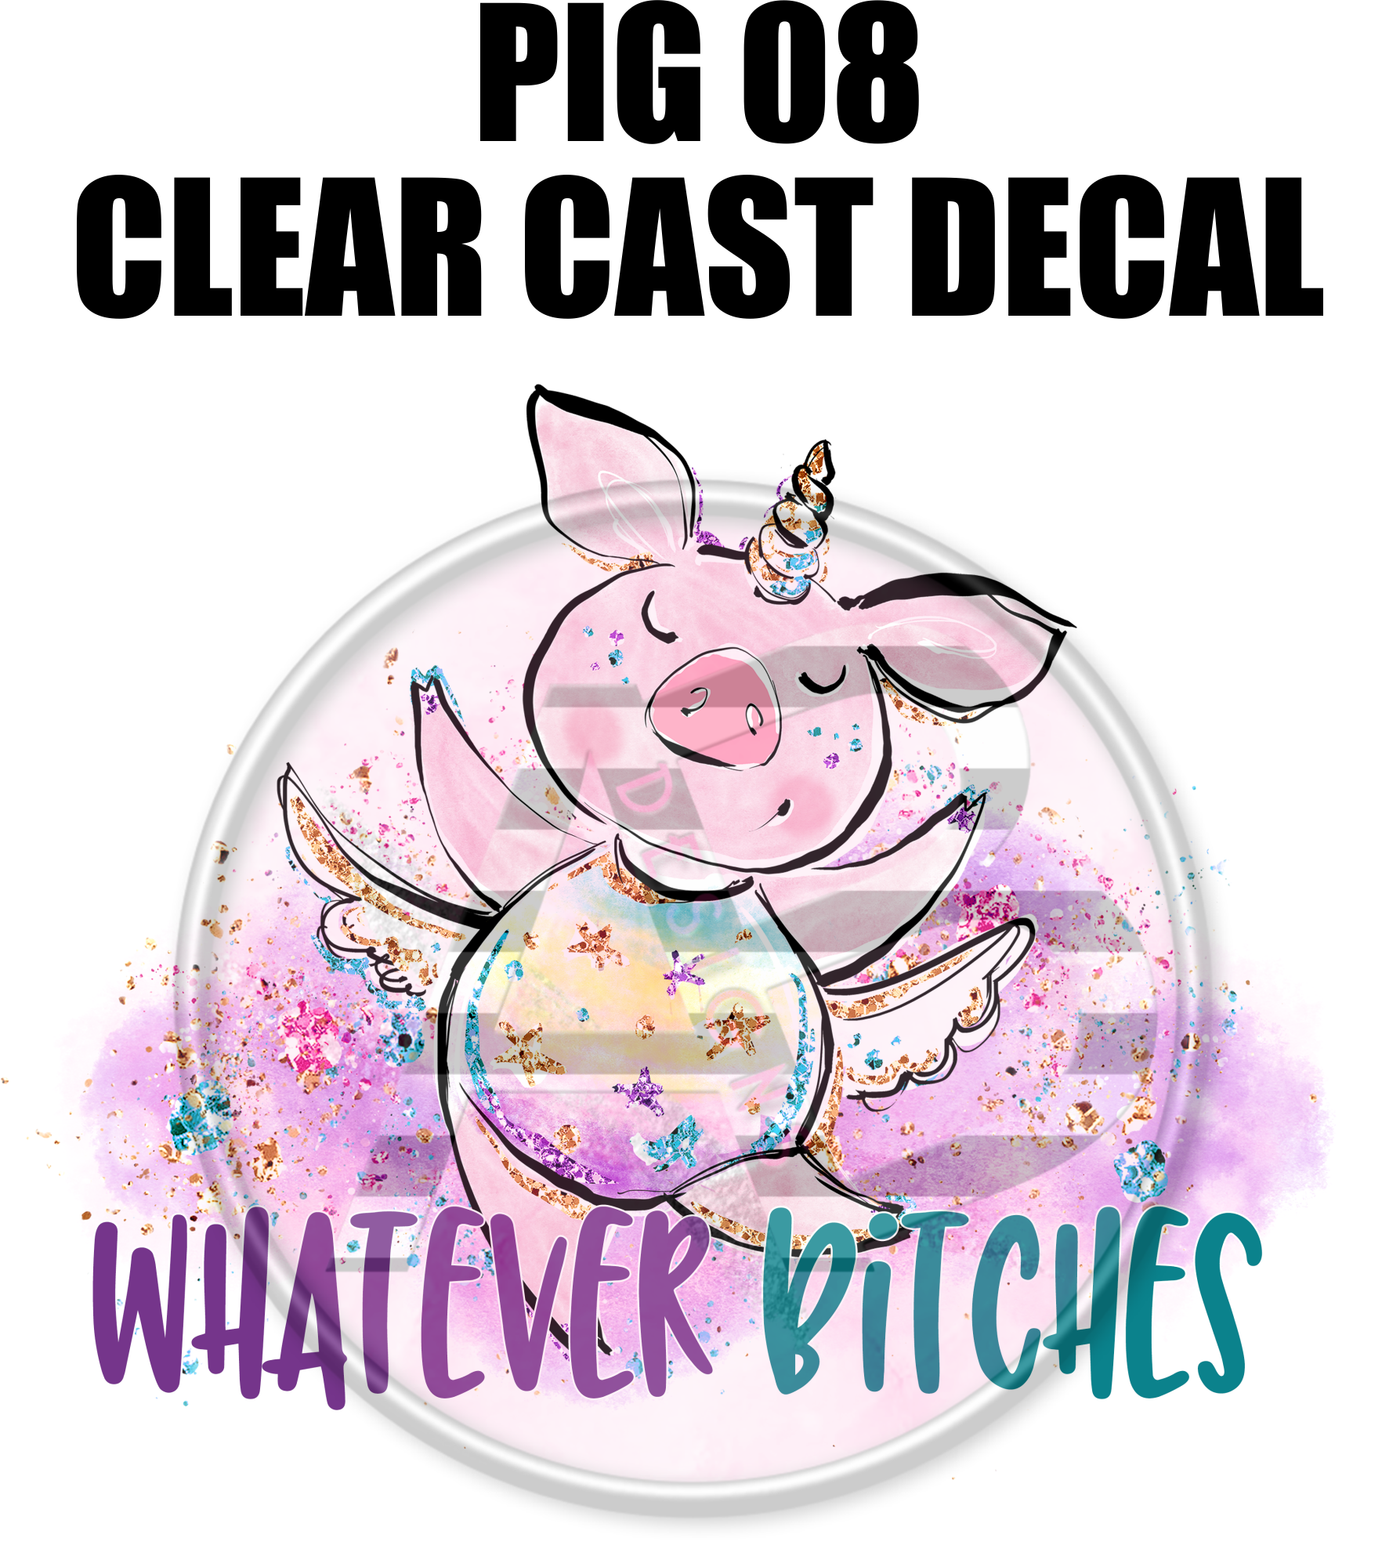 Pig 08 - Clear Cast Decal-430